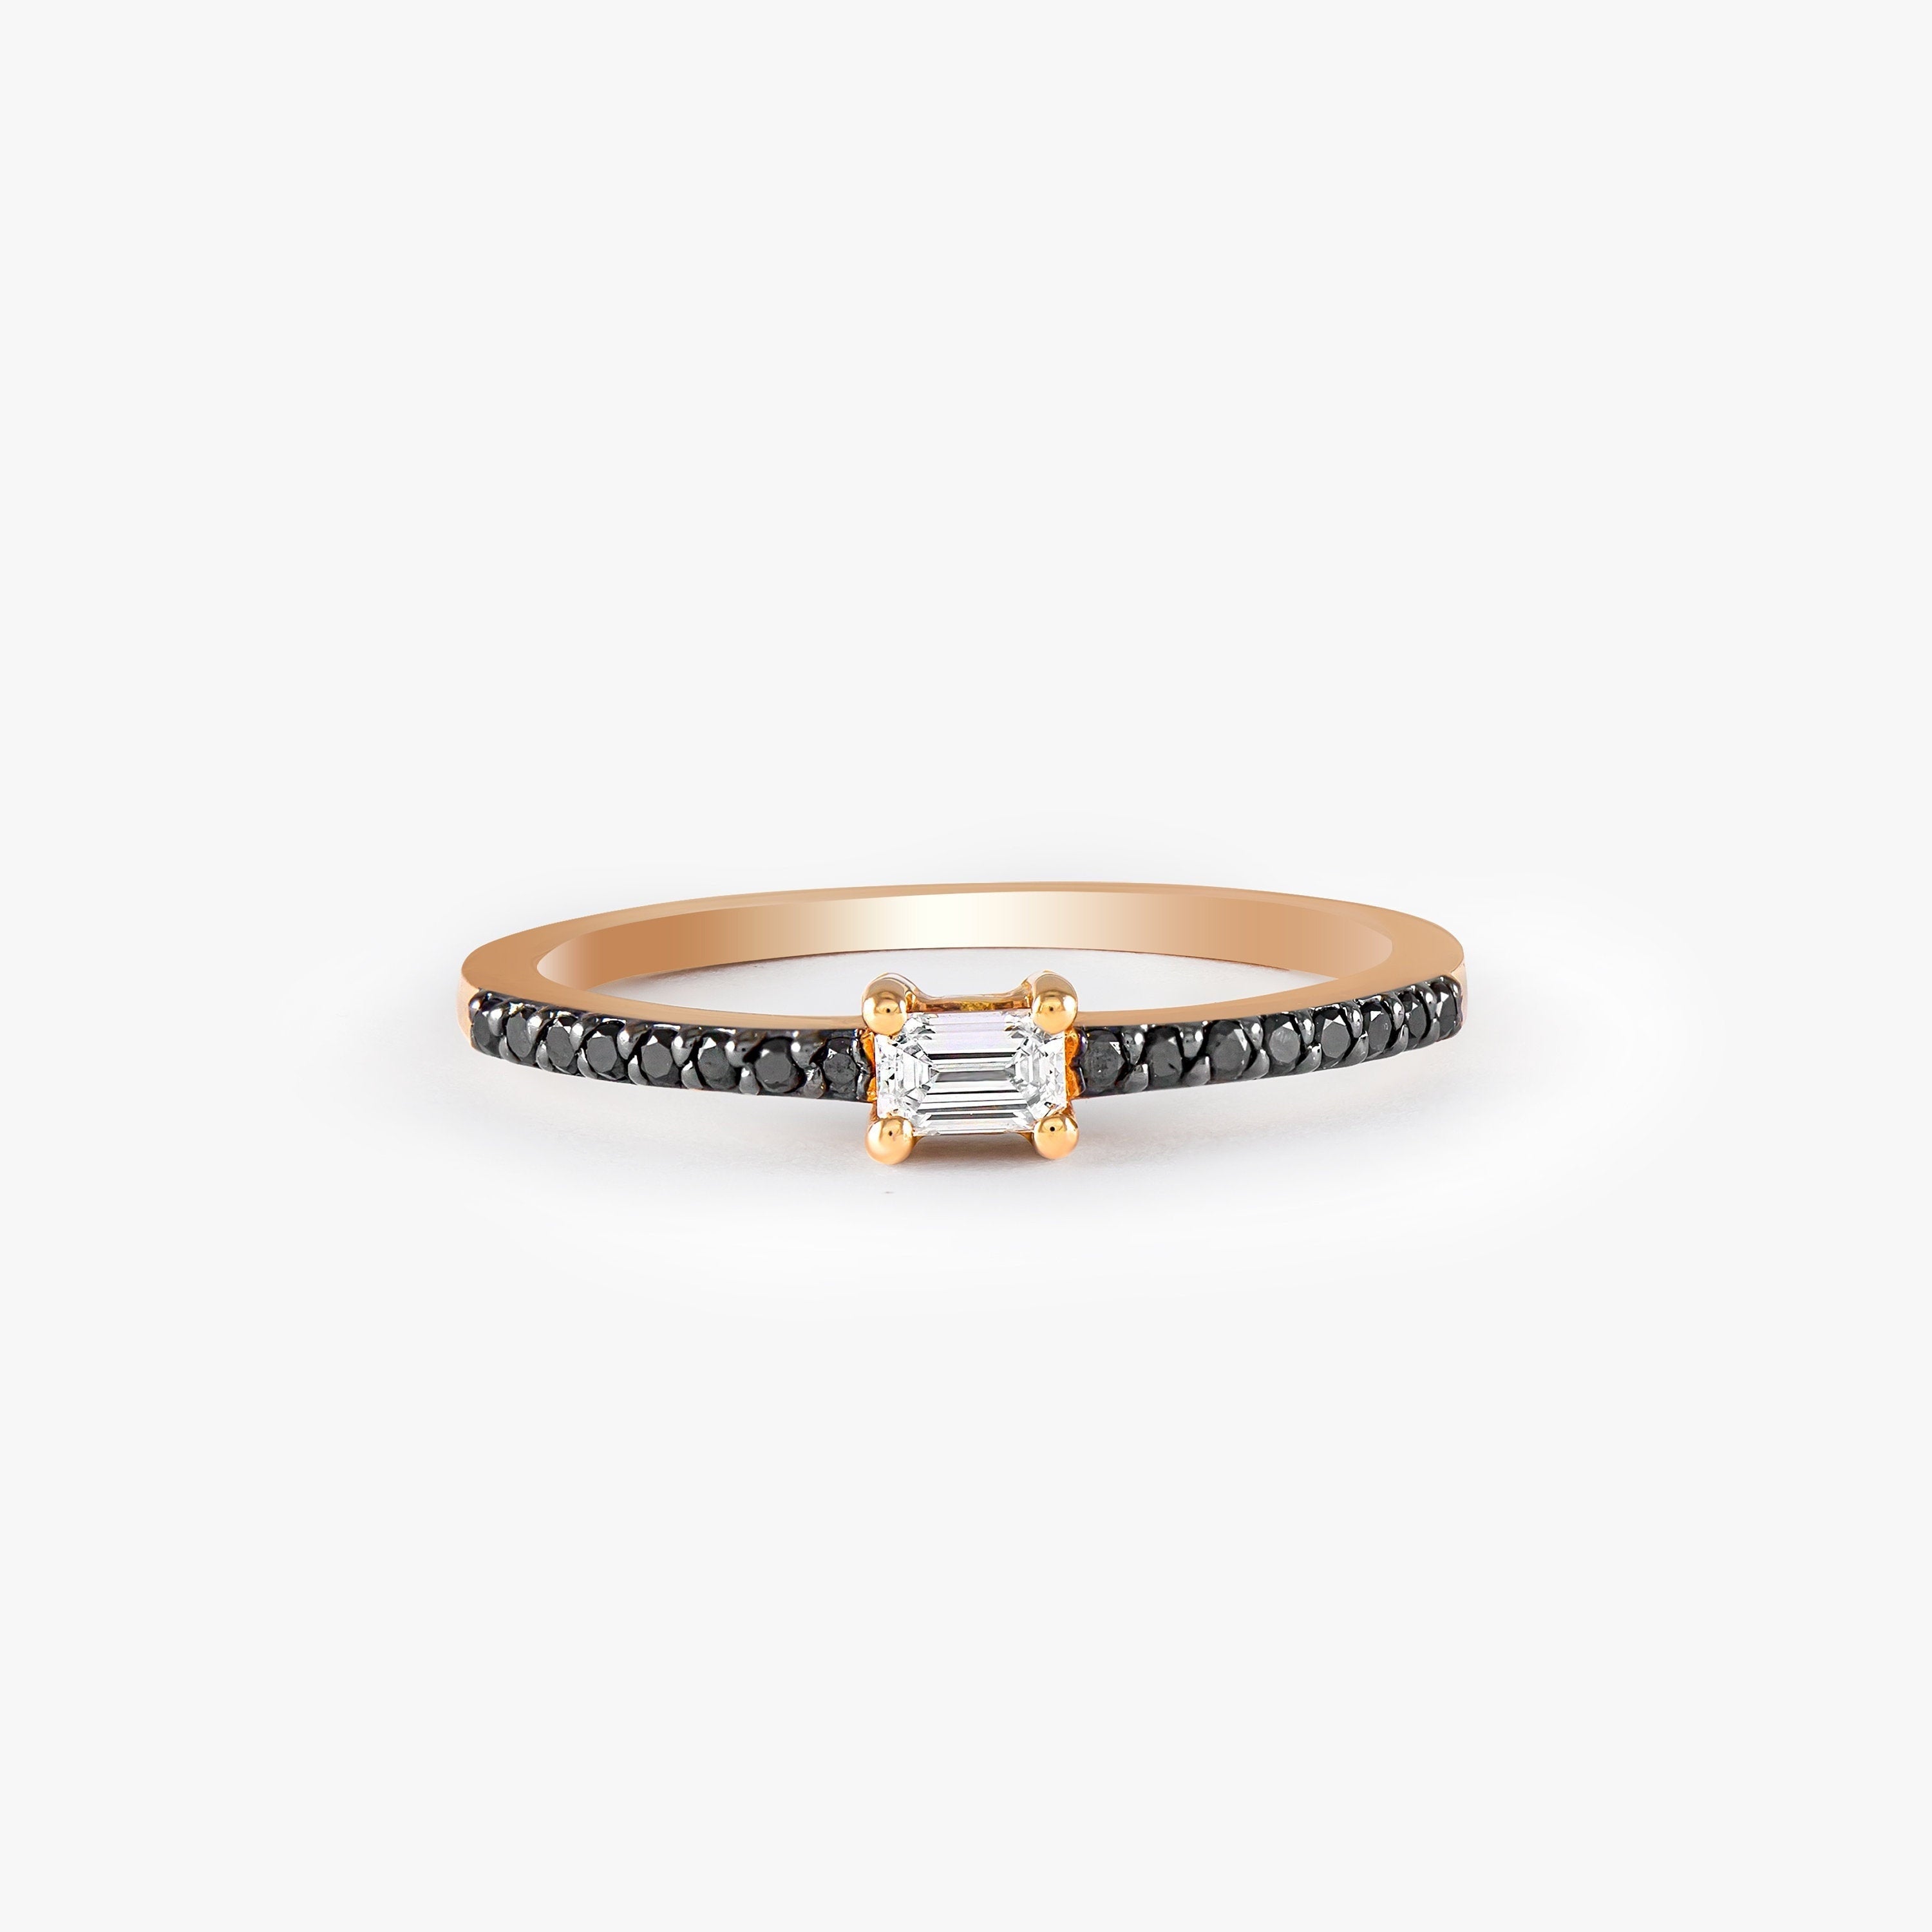 Black and White Diamond Stacking Ring in 14K Gold